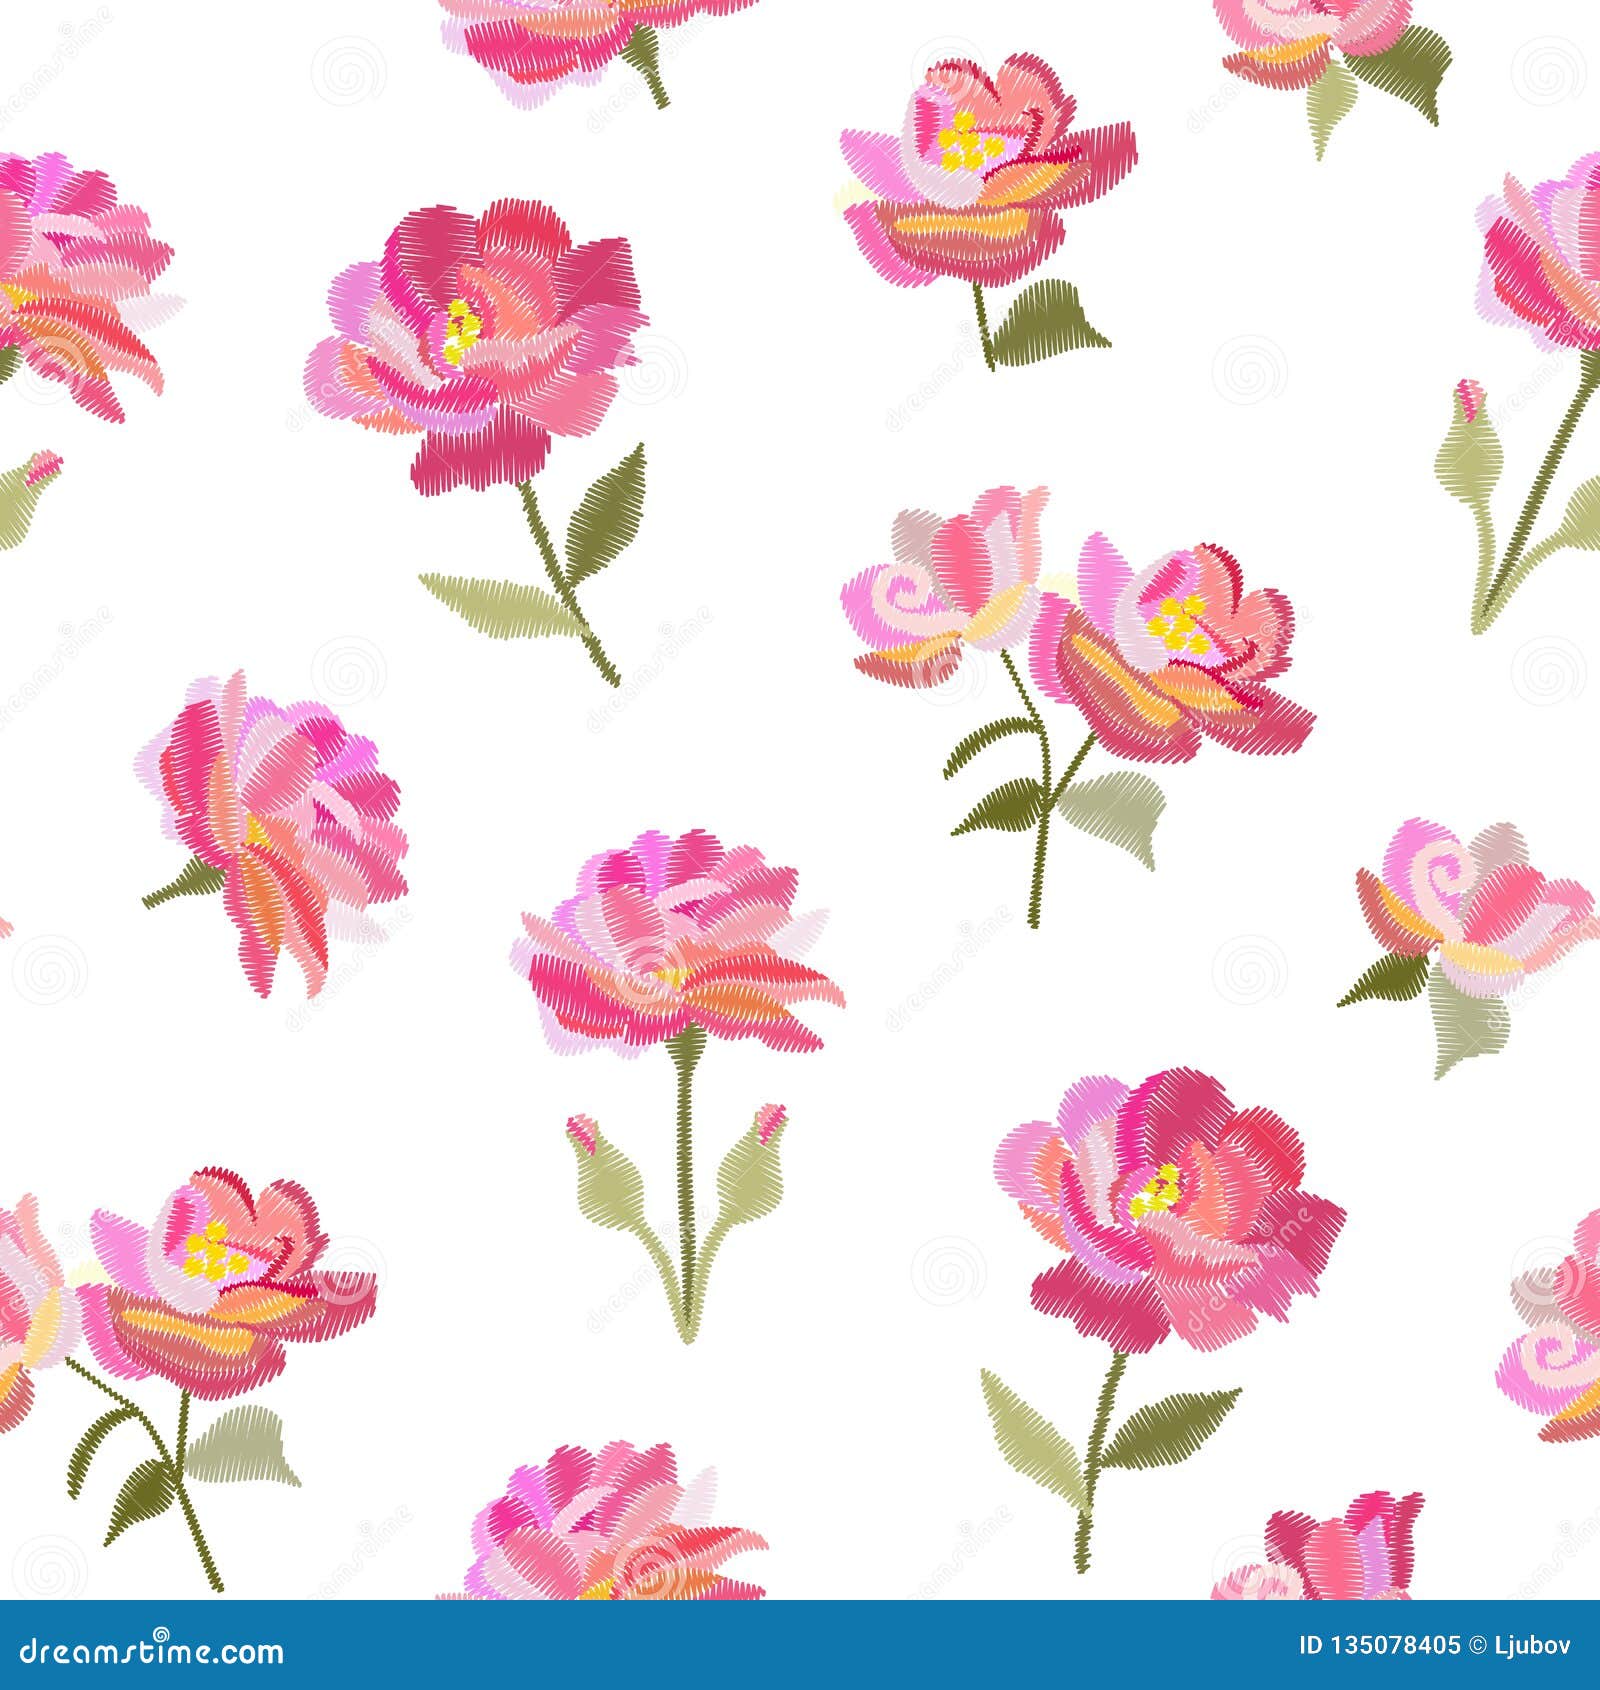 White And Pink Roses Embroidery Template For Design Of Clothes